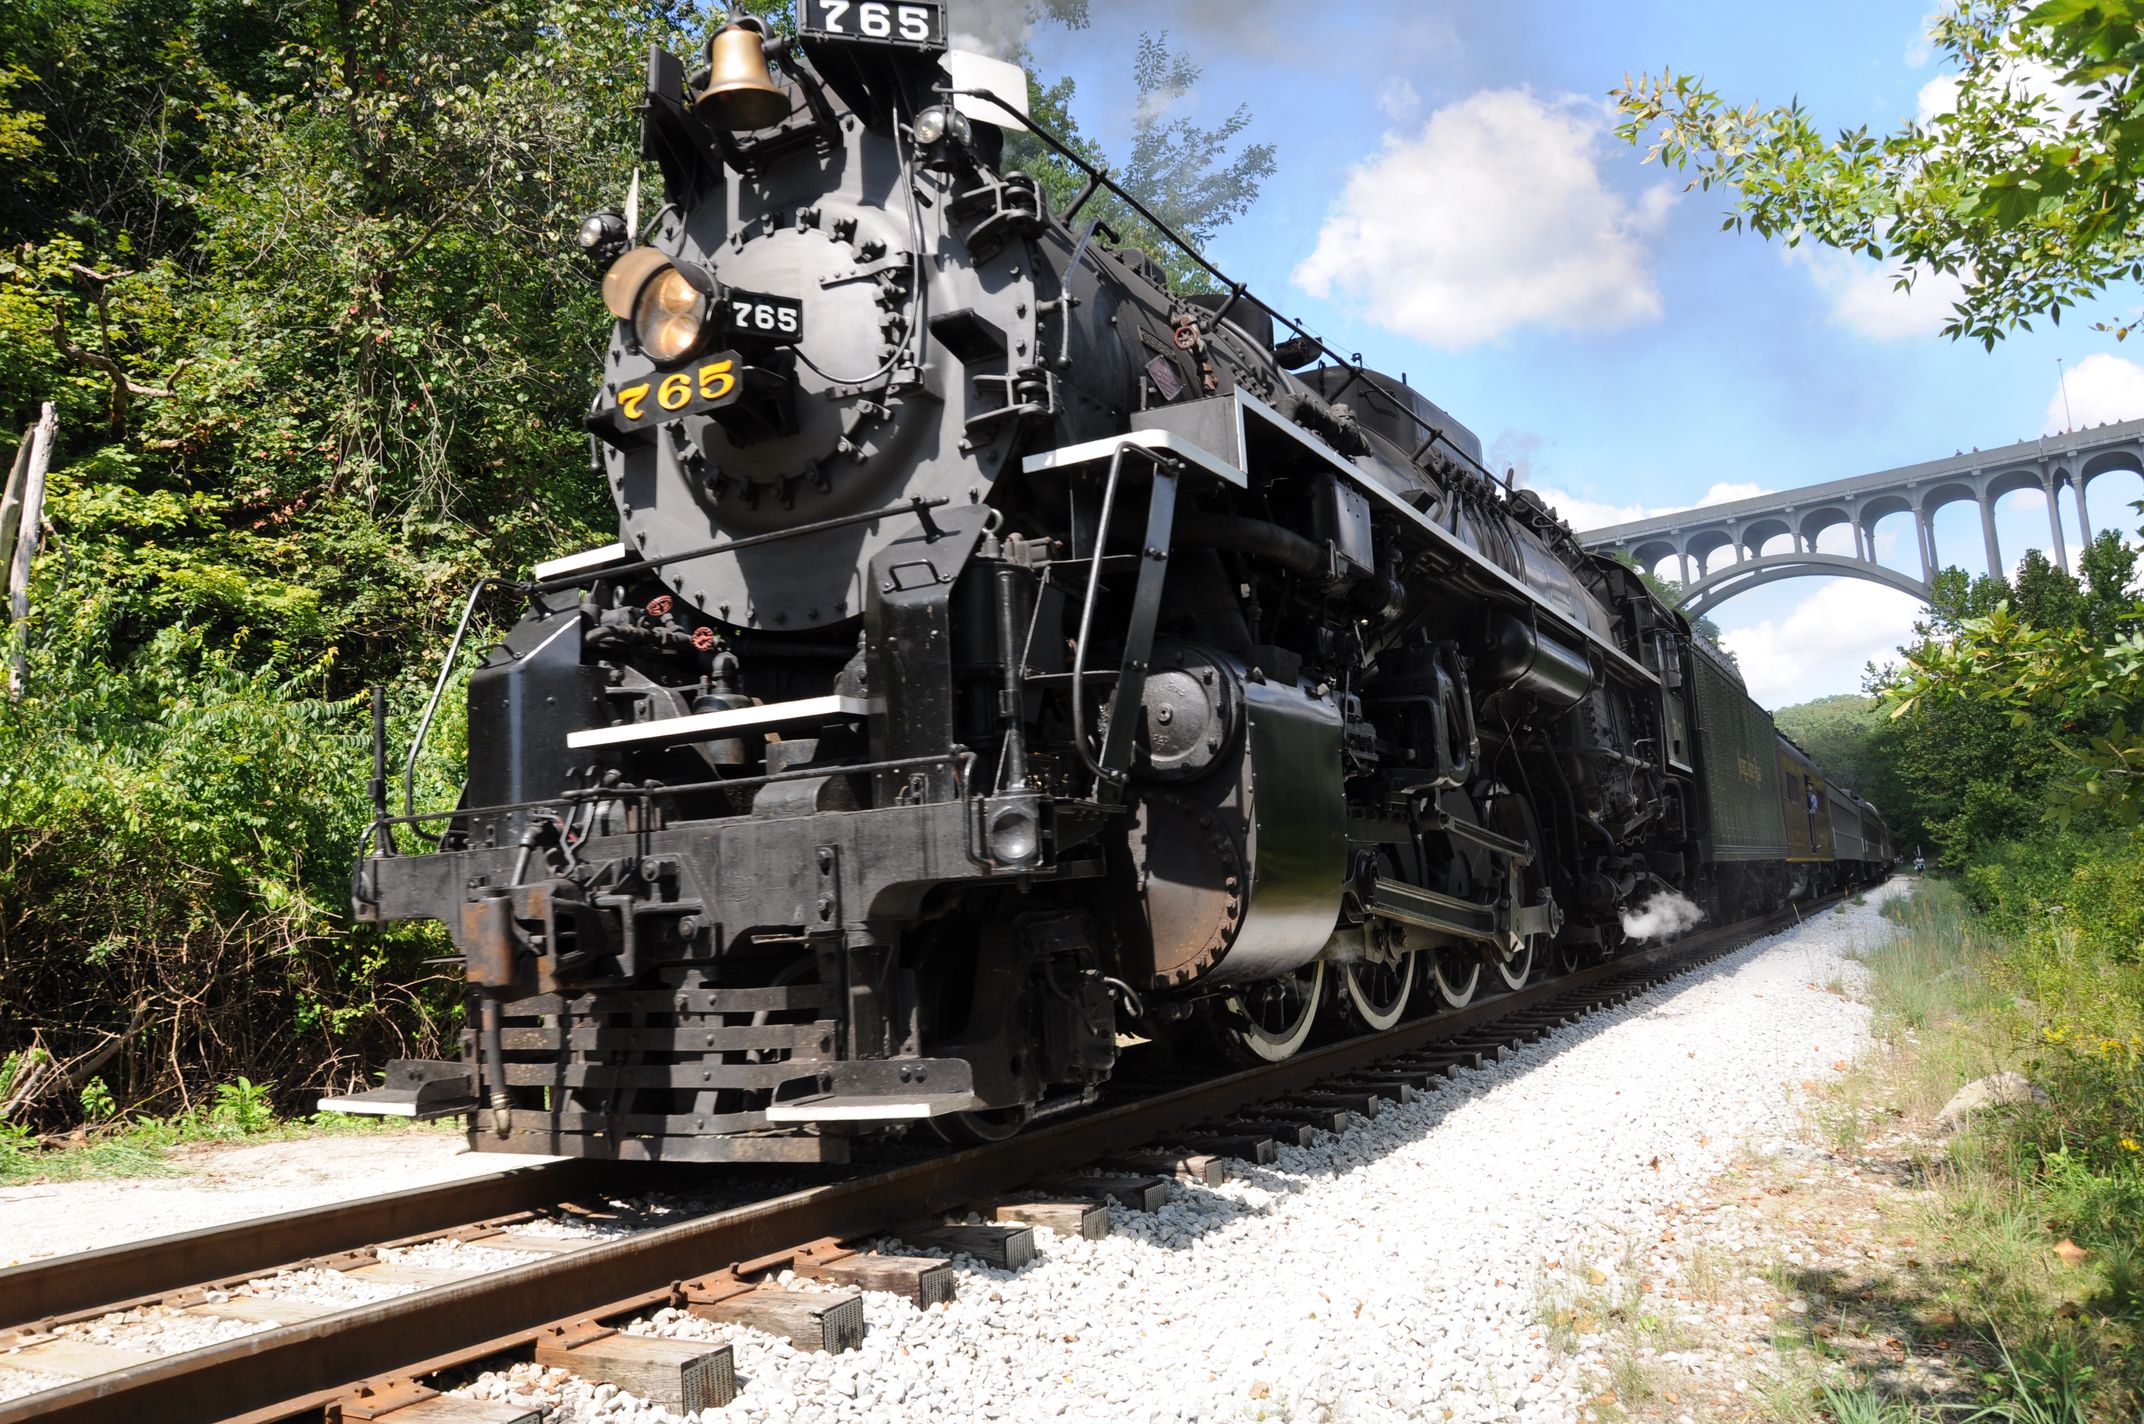 Riders on the special steam train can de-board at a secure location for an exclusive photo opportunity. Watch as this 400-ton locomotive thunders through the Cuyahoga Valley National Park at full speed and experience the wonder that surrounds the 'Steam in the Valley!'